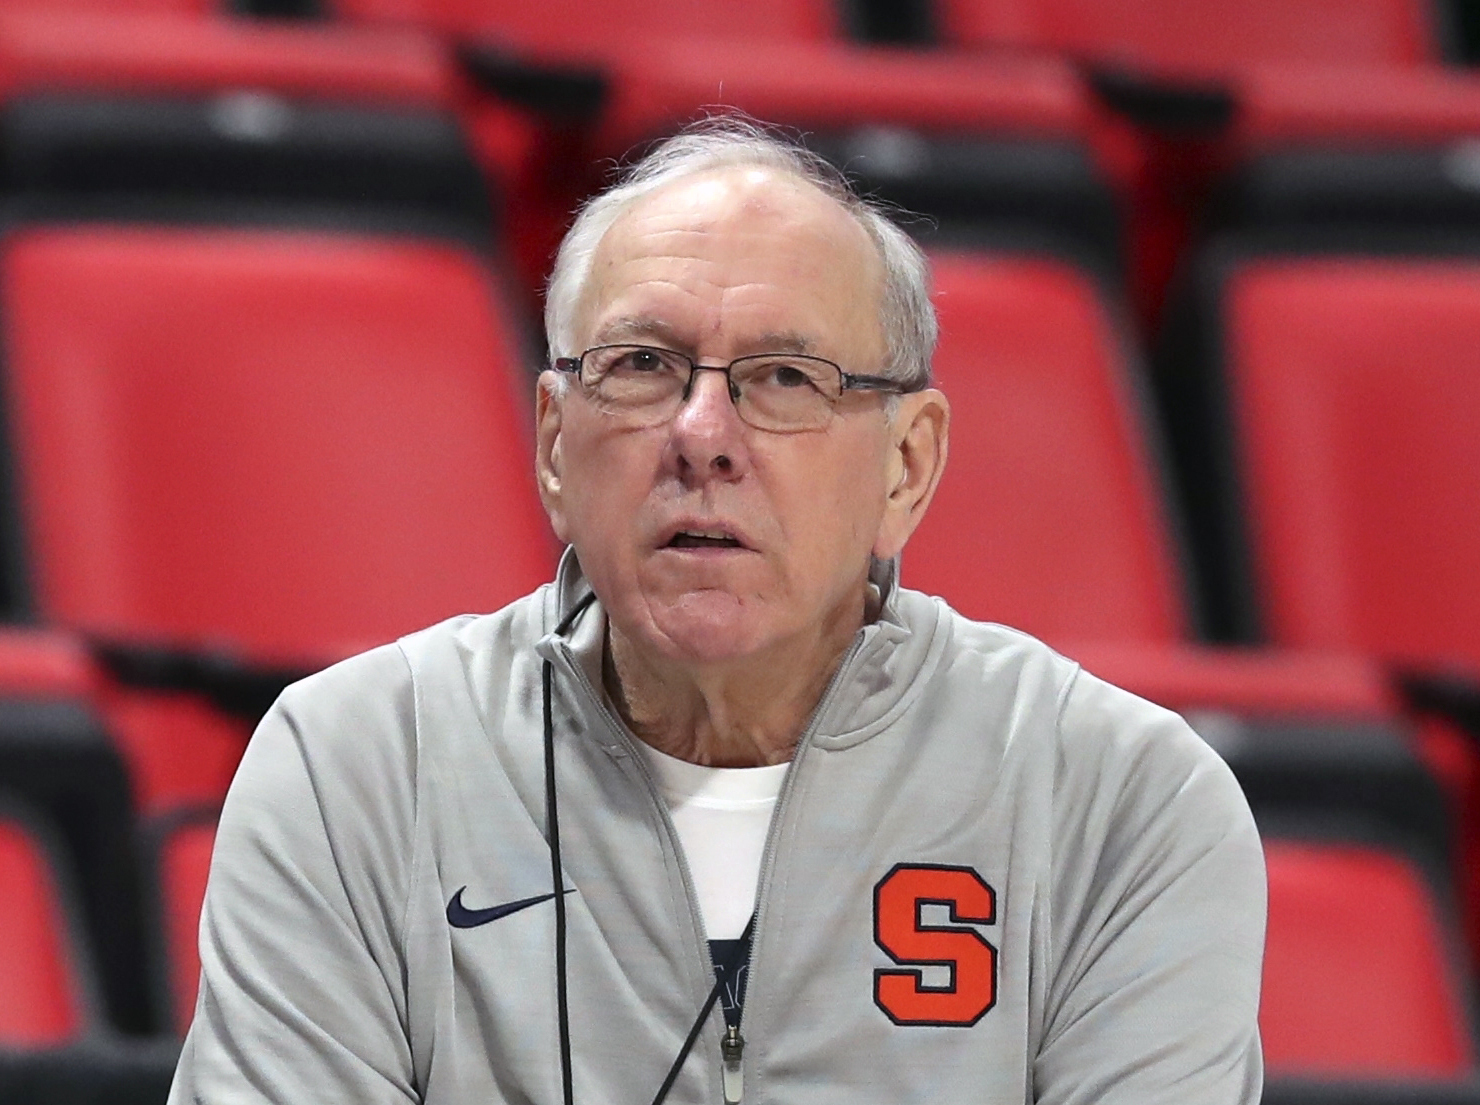 The Latest: Syracuse coach ‘heartbroken’ over fatal accident